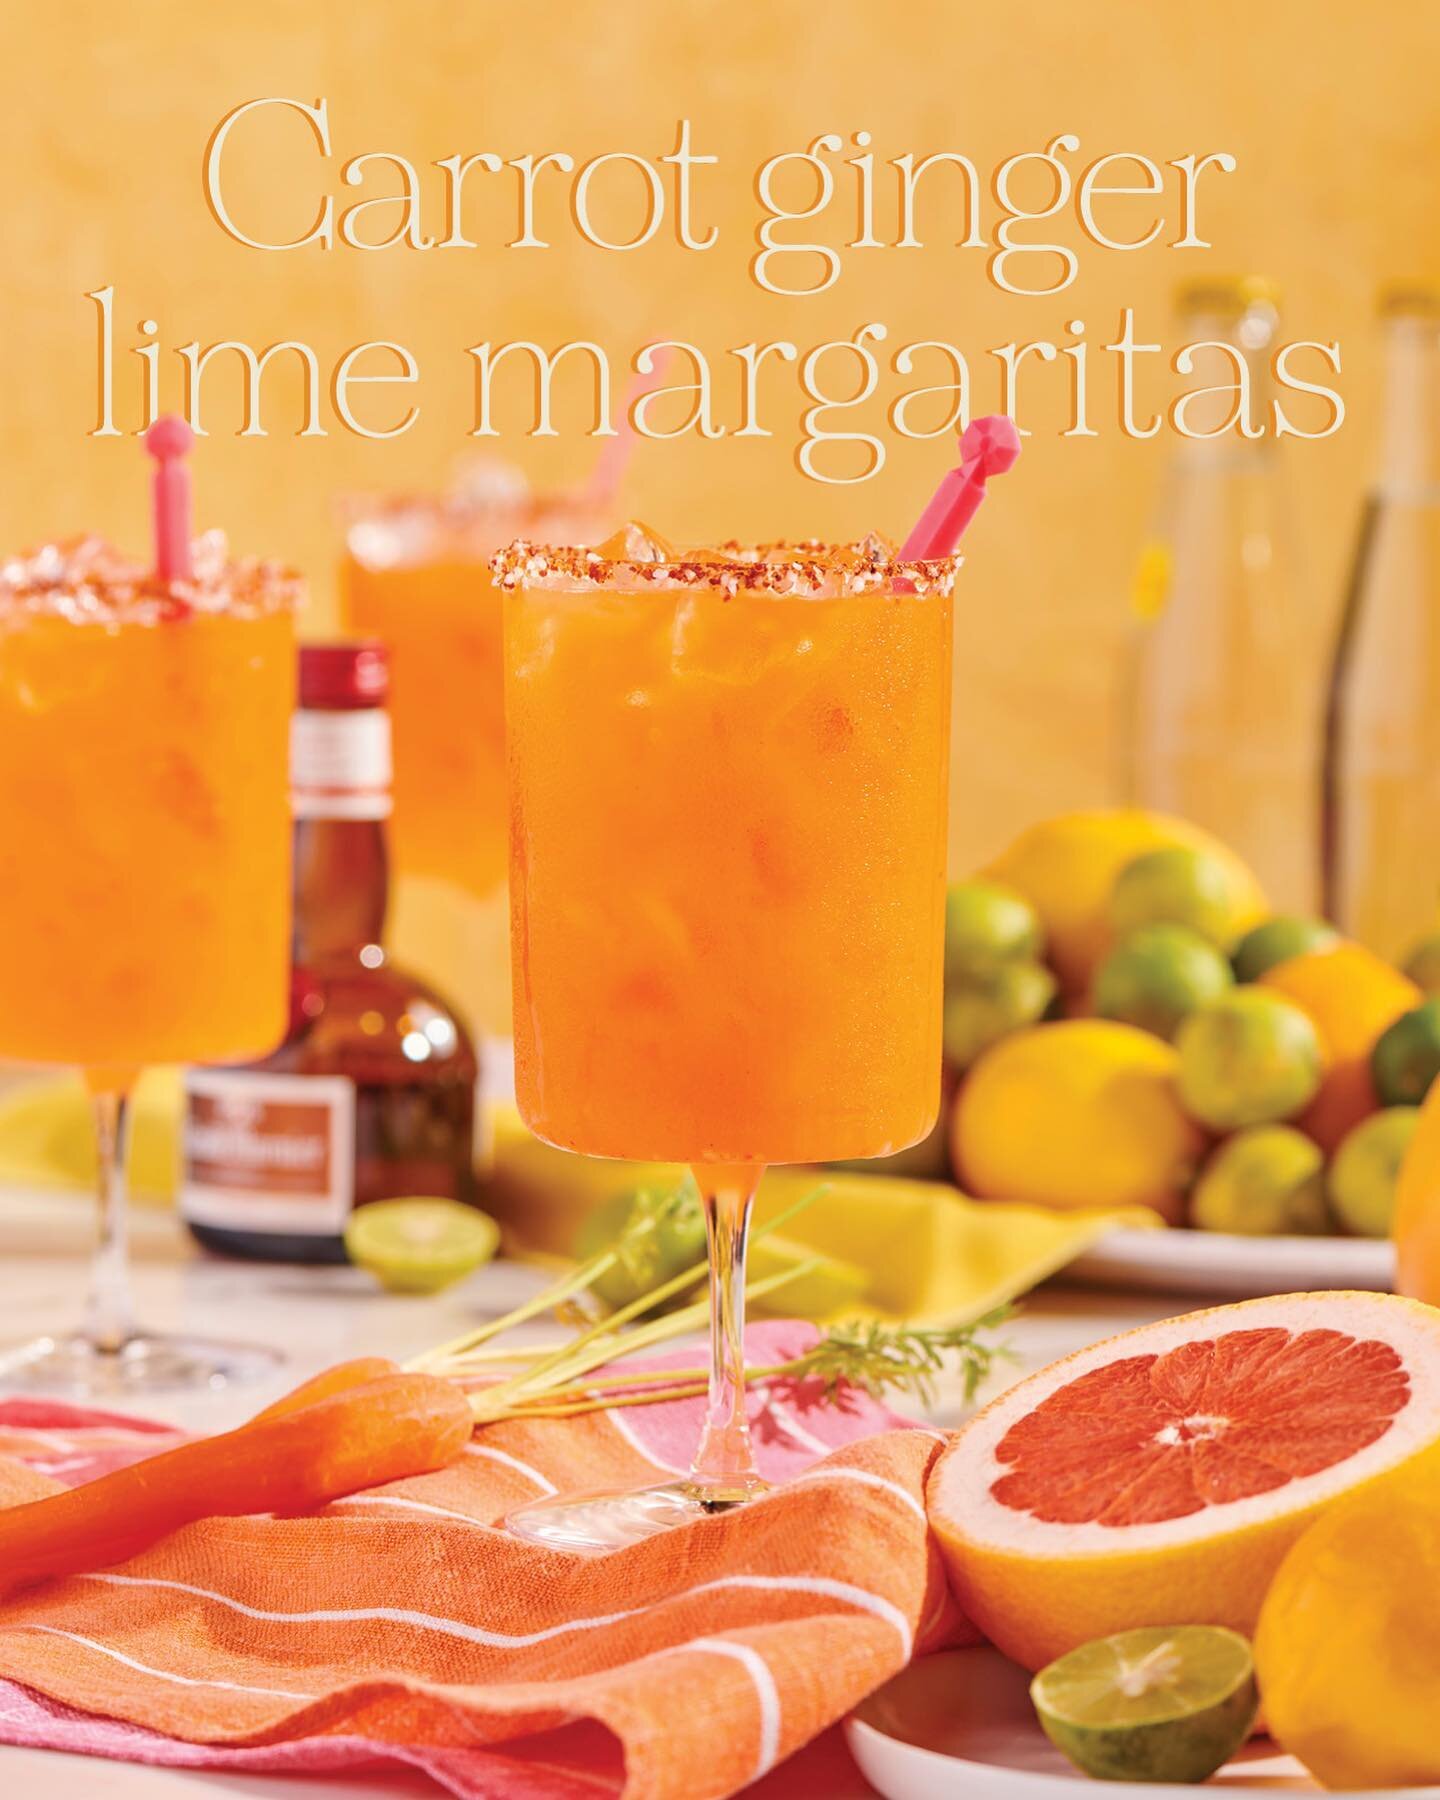 Happy sunny Friday! ☀️

As we continue on with our creative, spring cocktail content, why not reinvent the traditional margarita with a spring spin to celebrate Cinco De Mayo? Enter fresh baby 🥕 carrots!

Carrot Ginger Lime Margarita

Ingredients
- 